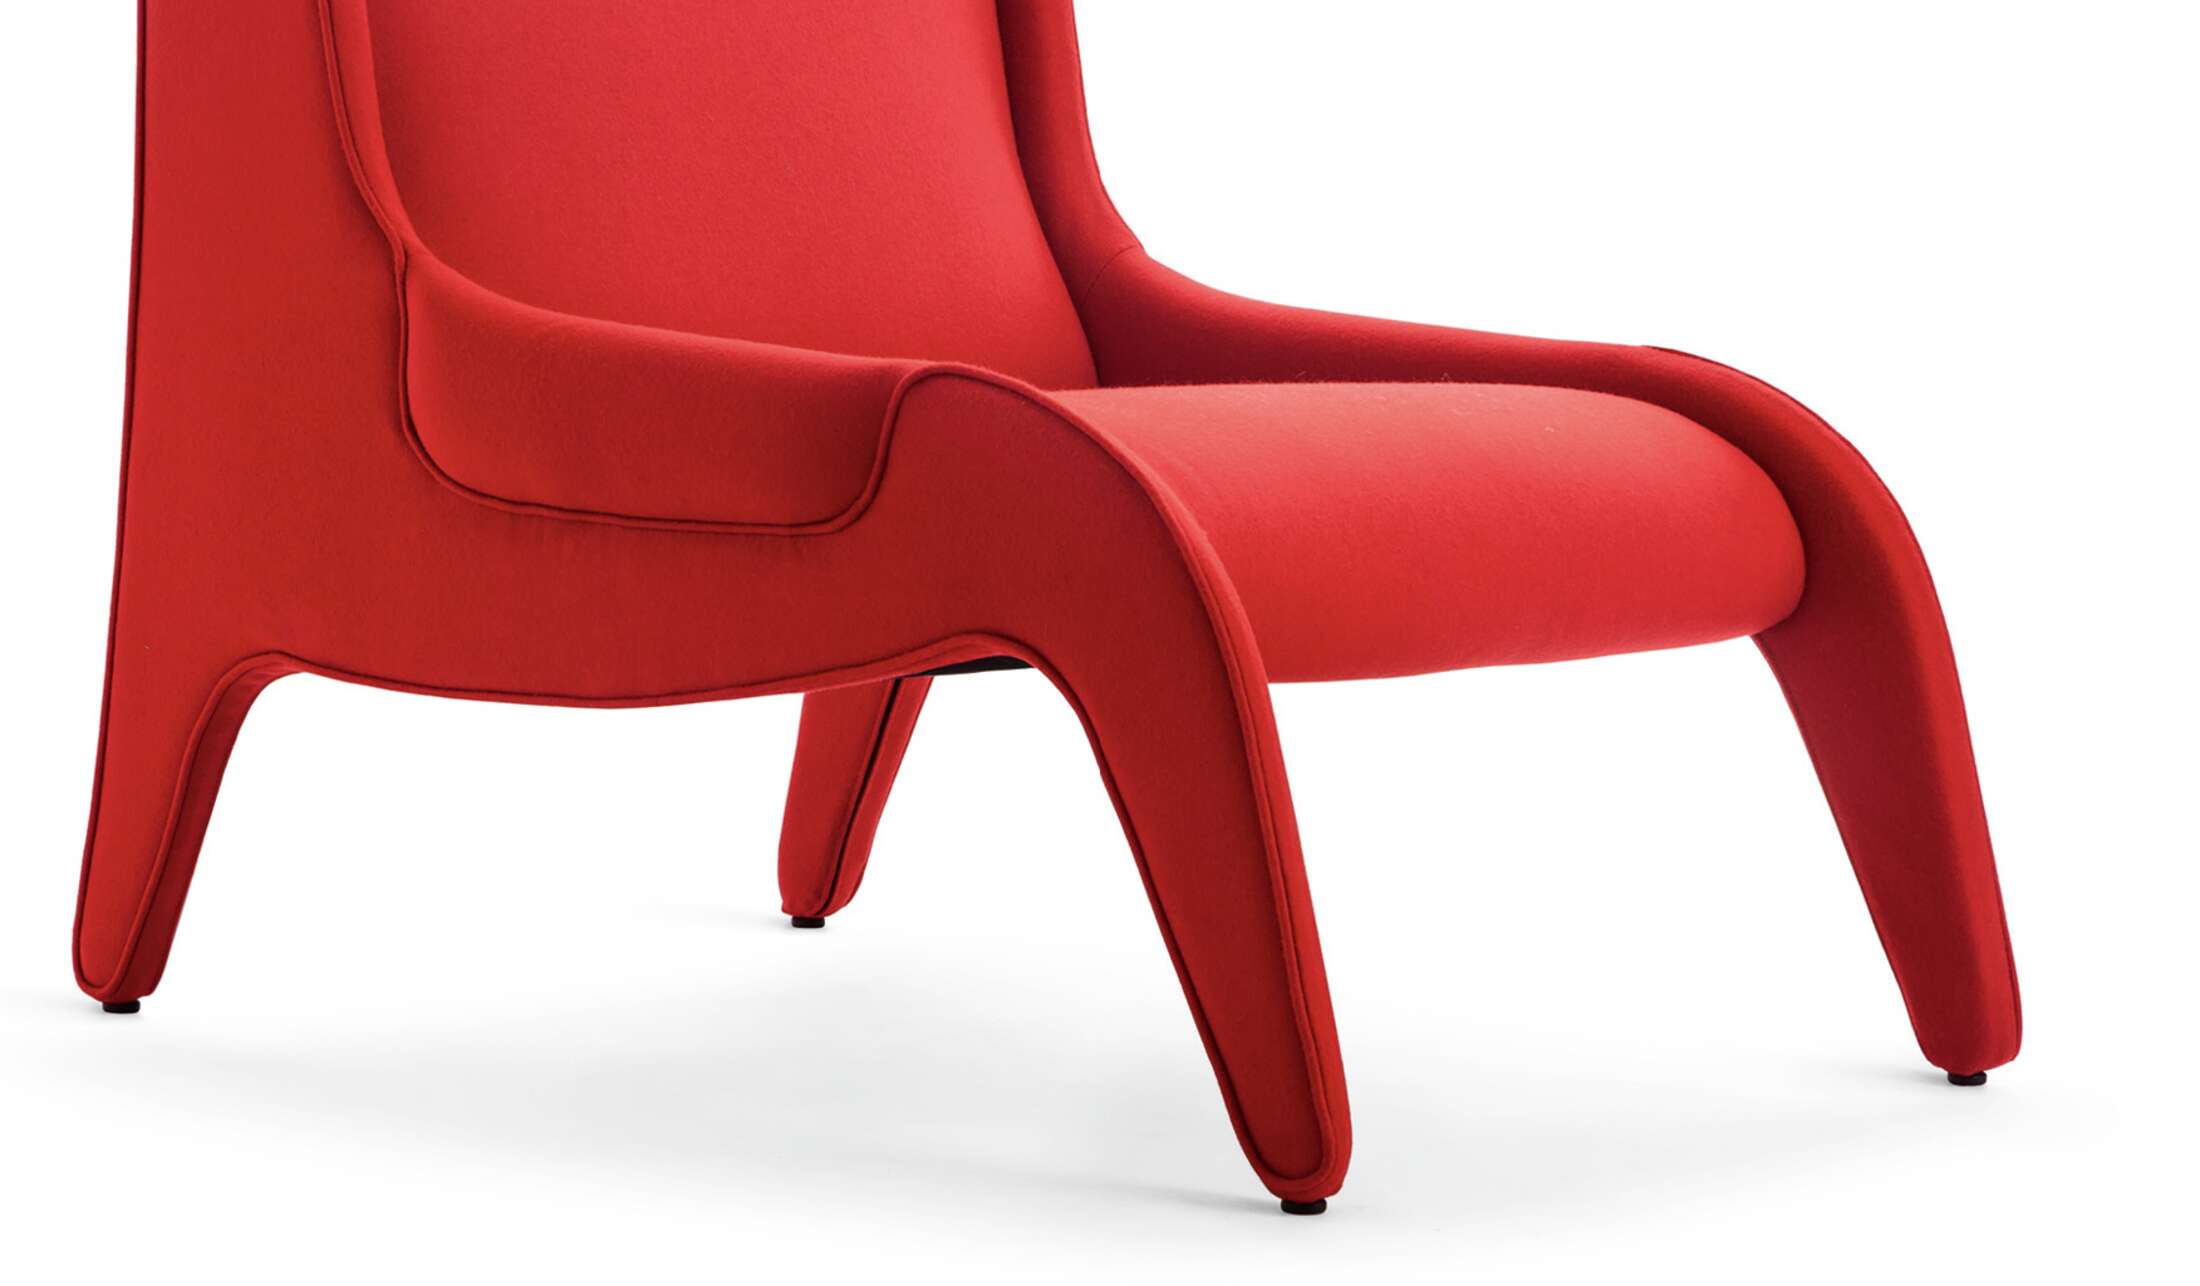 Armchair designed by Marco Zanuso in 1949, relaunched in 2015. Manufactured by Cassina in Italy. Prices vary dependent on the chosen material.